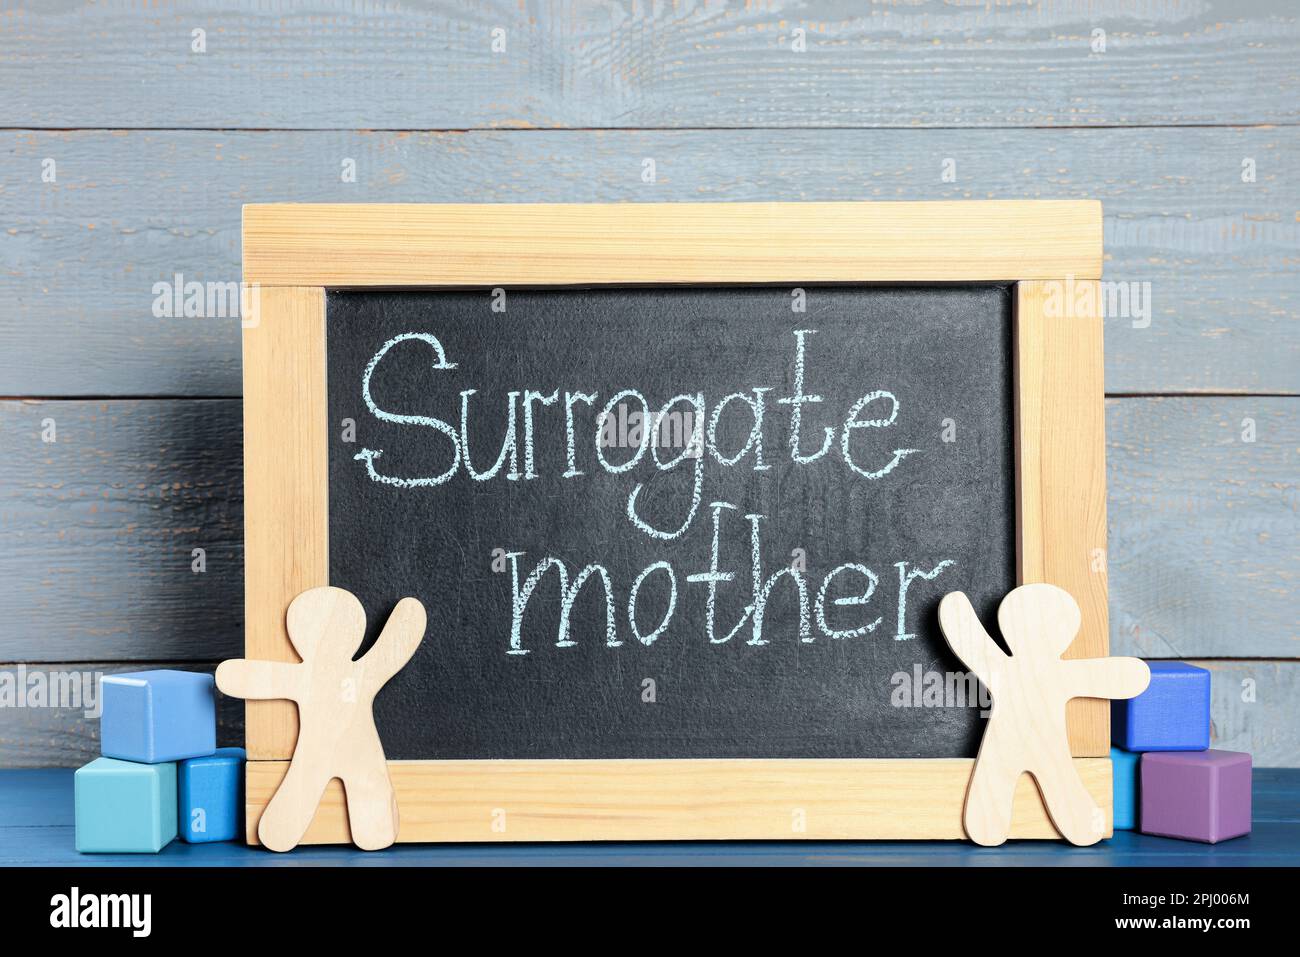 Small chalkboard with phrase Surrogate mother, people figures and cubes on blue wooden table Stock Photo